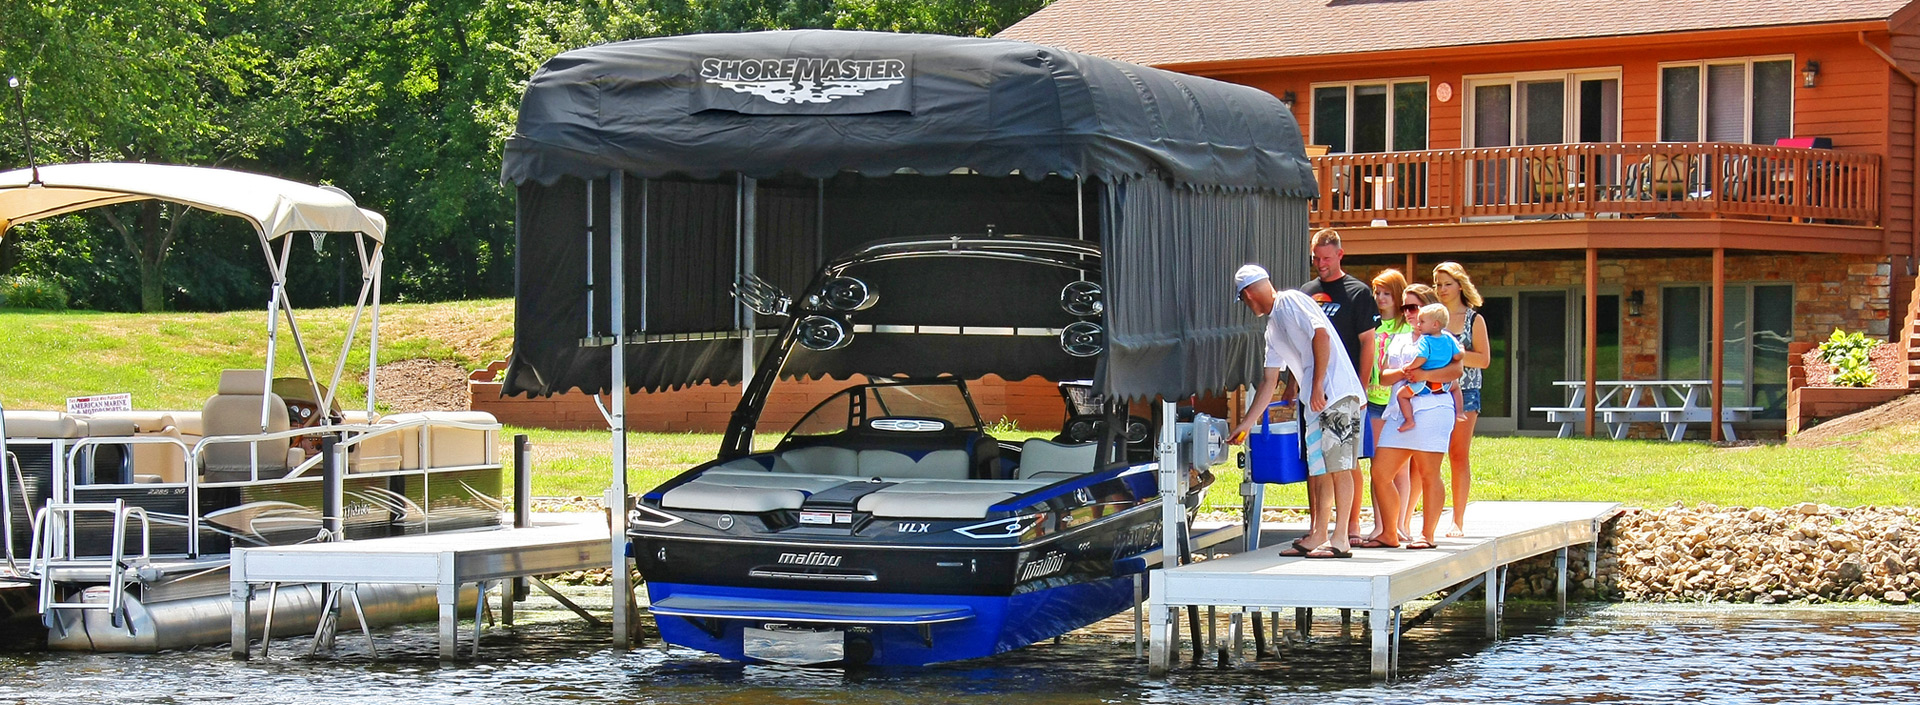 HCI Docks - Docks and Boat Lifts from Shoremaster, Rhino Marine, Polydock Products and more